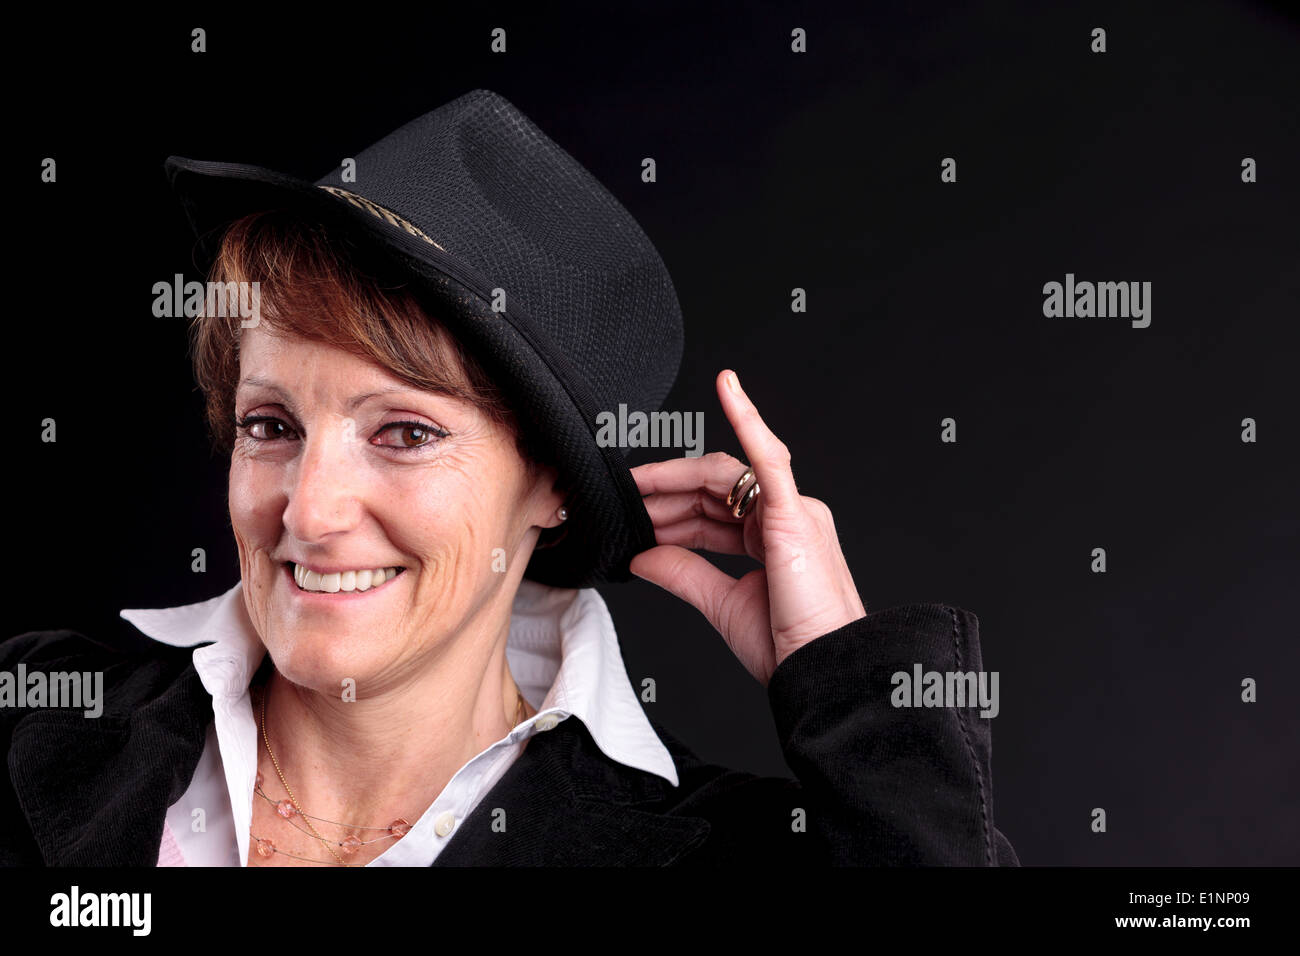 an old white woman smiling while holding up a black fashion hat Stock Photo